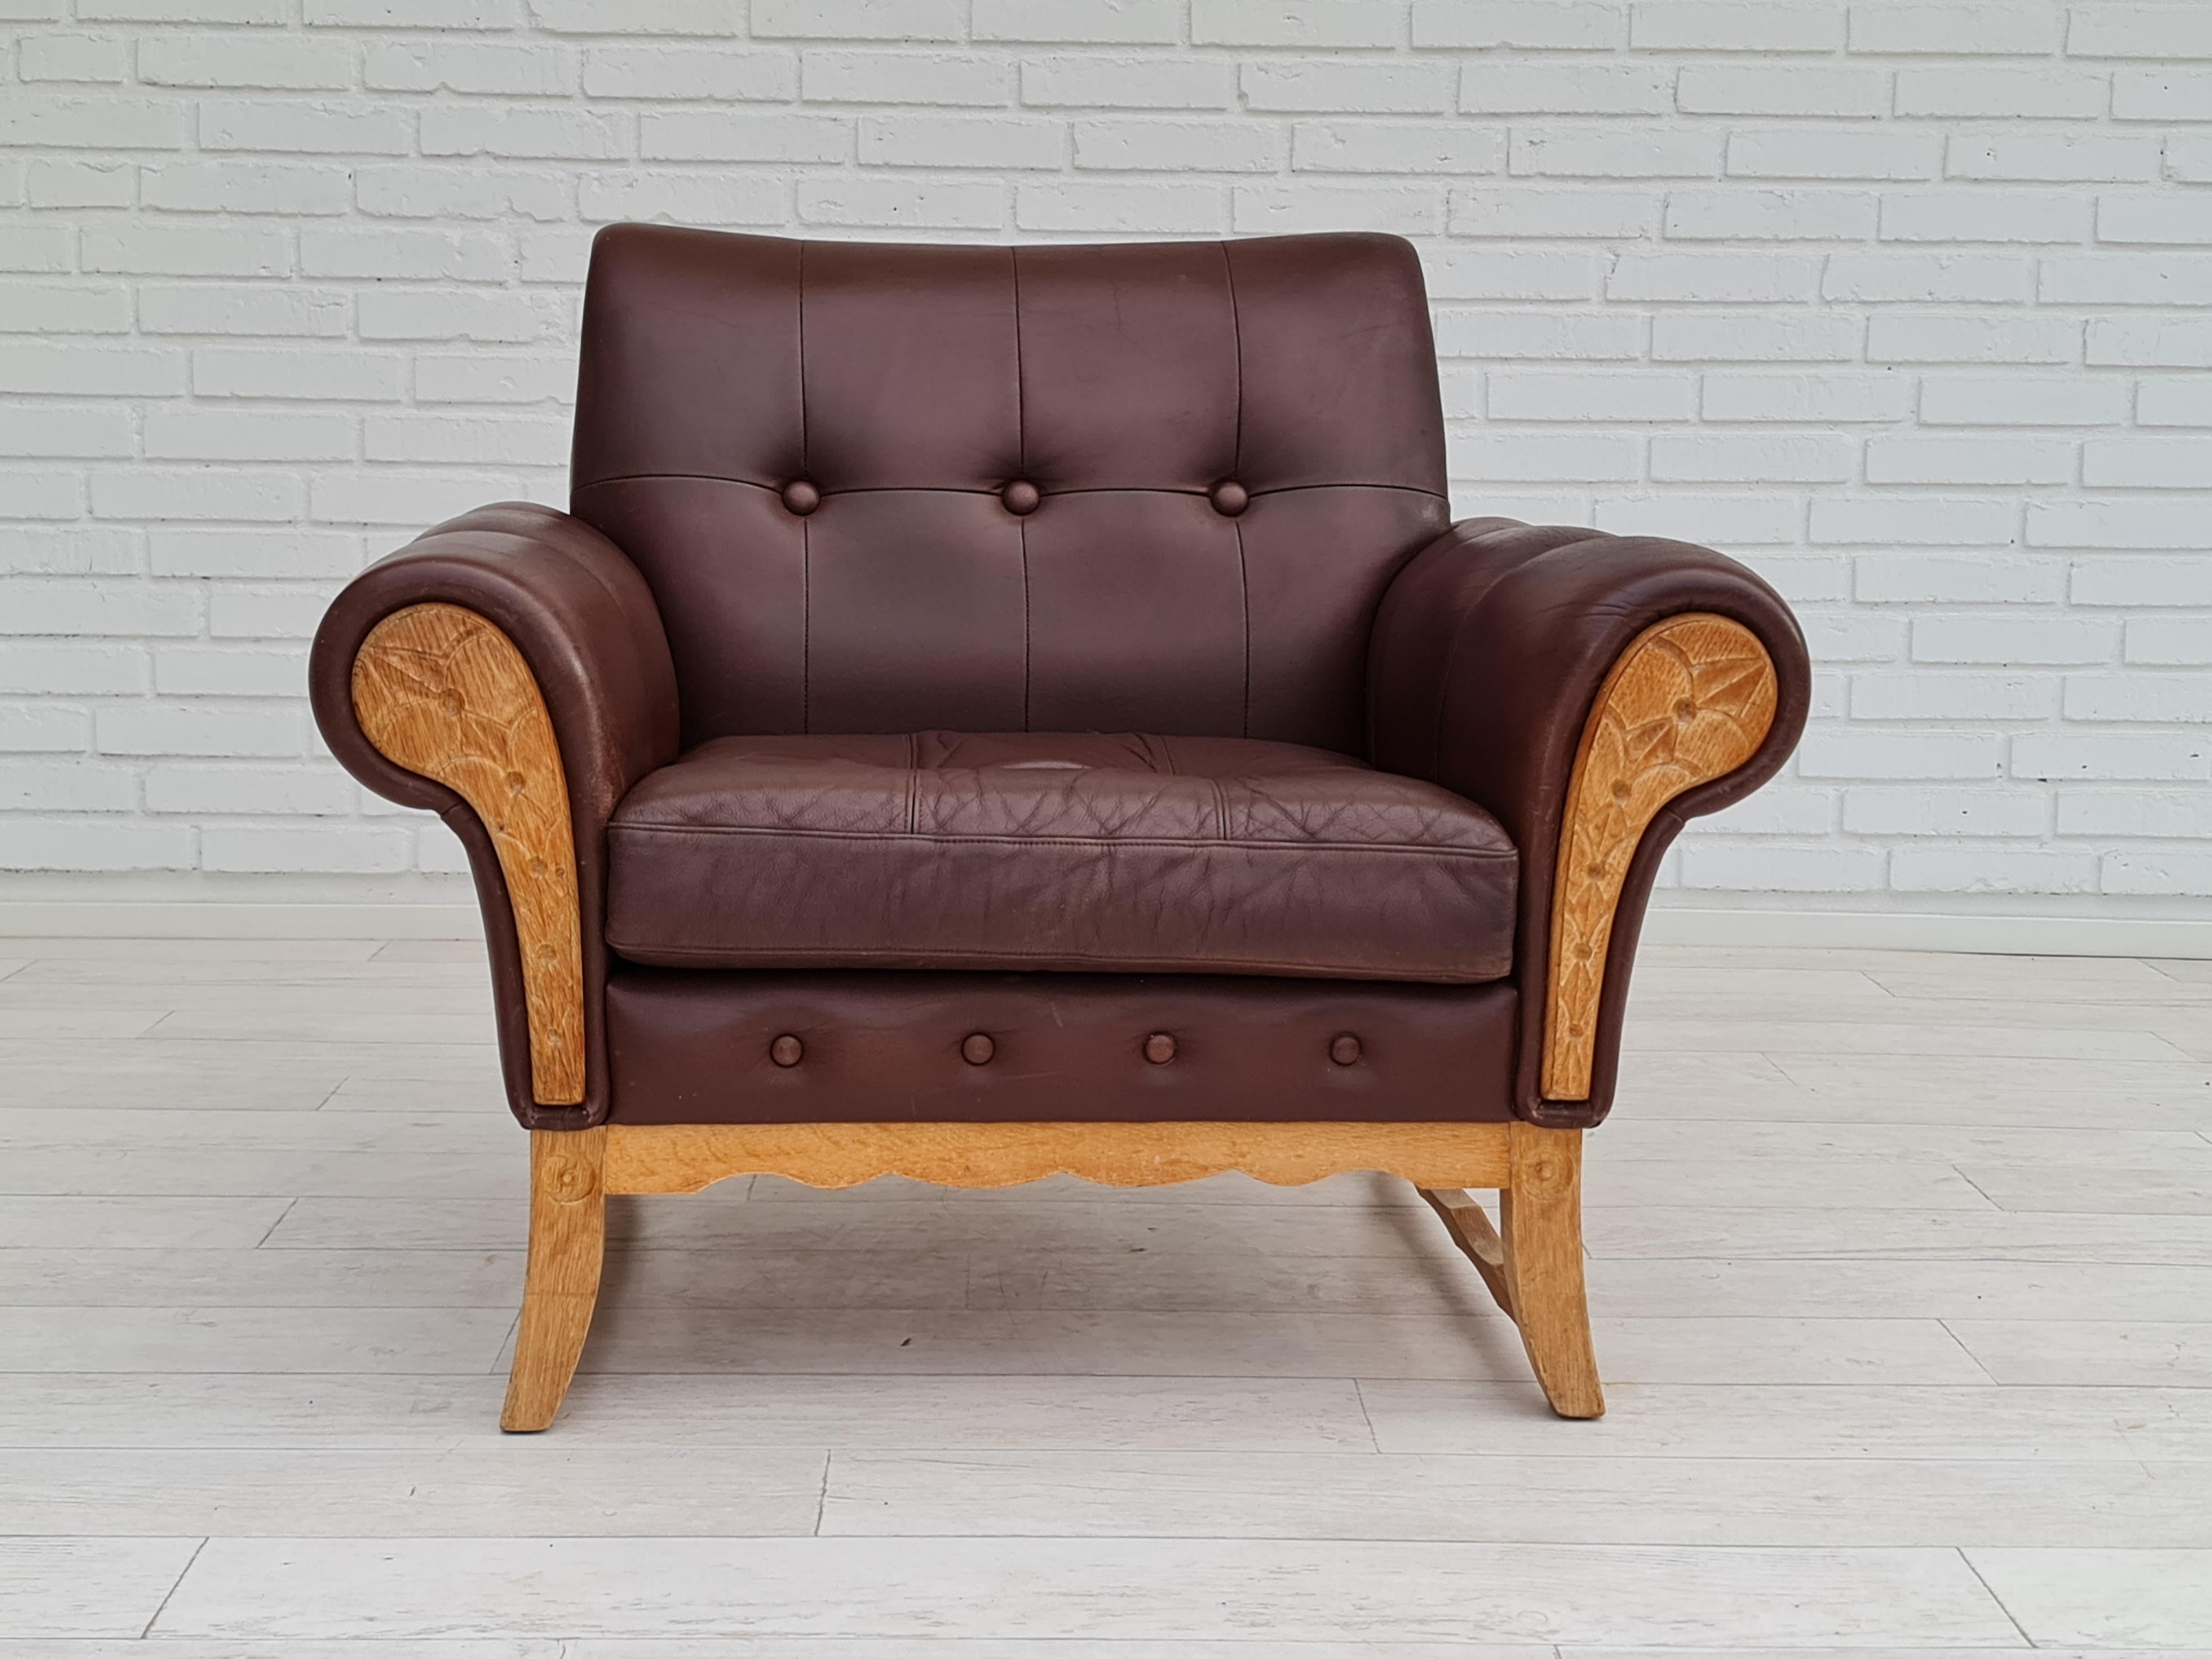 70s, Vintage Danish Armchair, Leather, Oak Wood In Good Condition For Sale In Tarm, 82